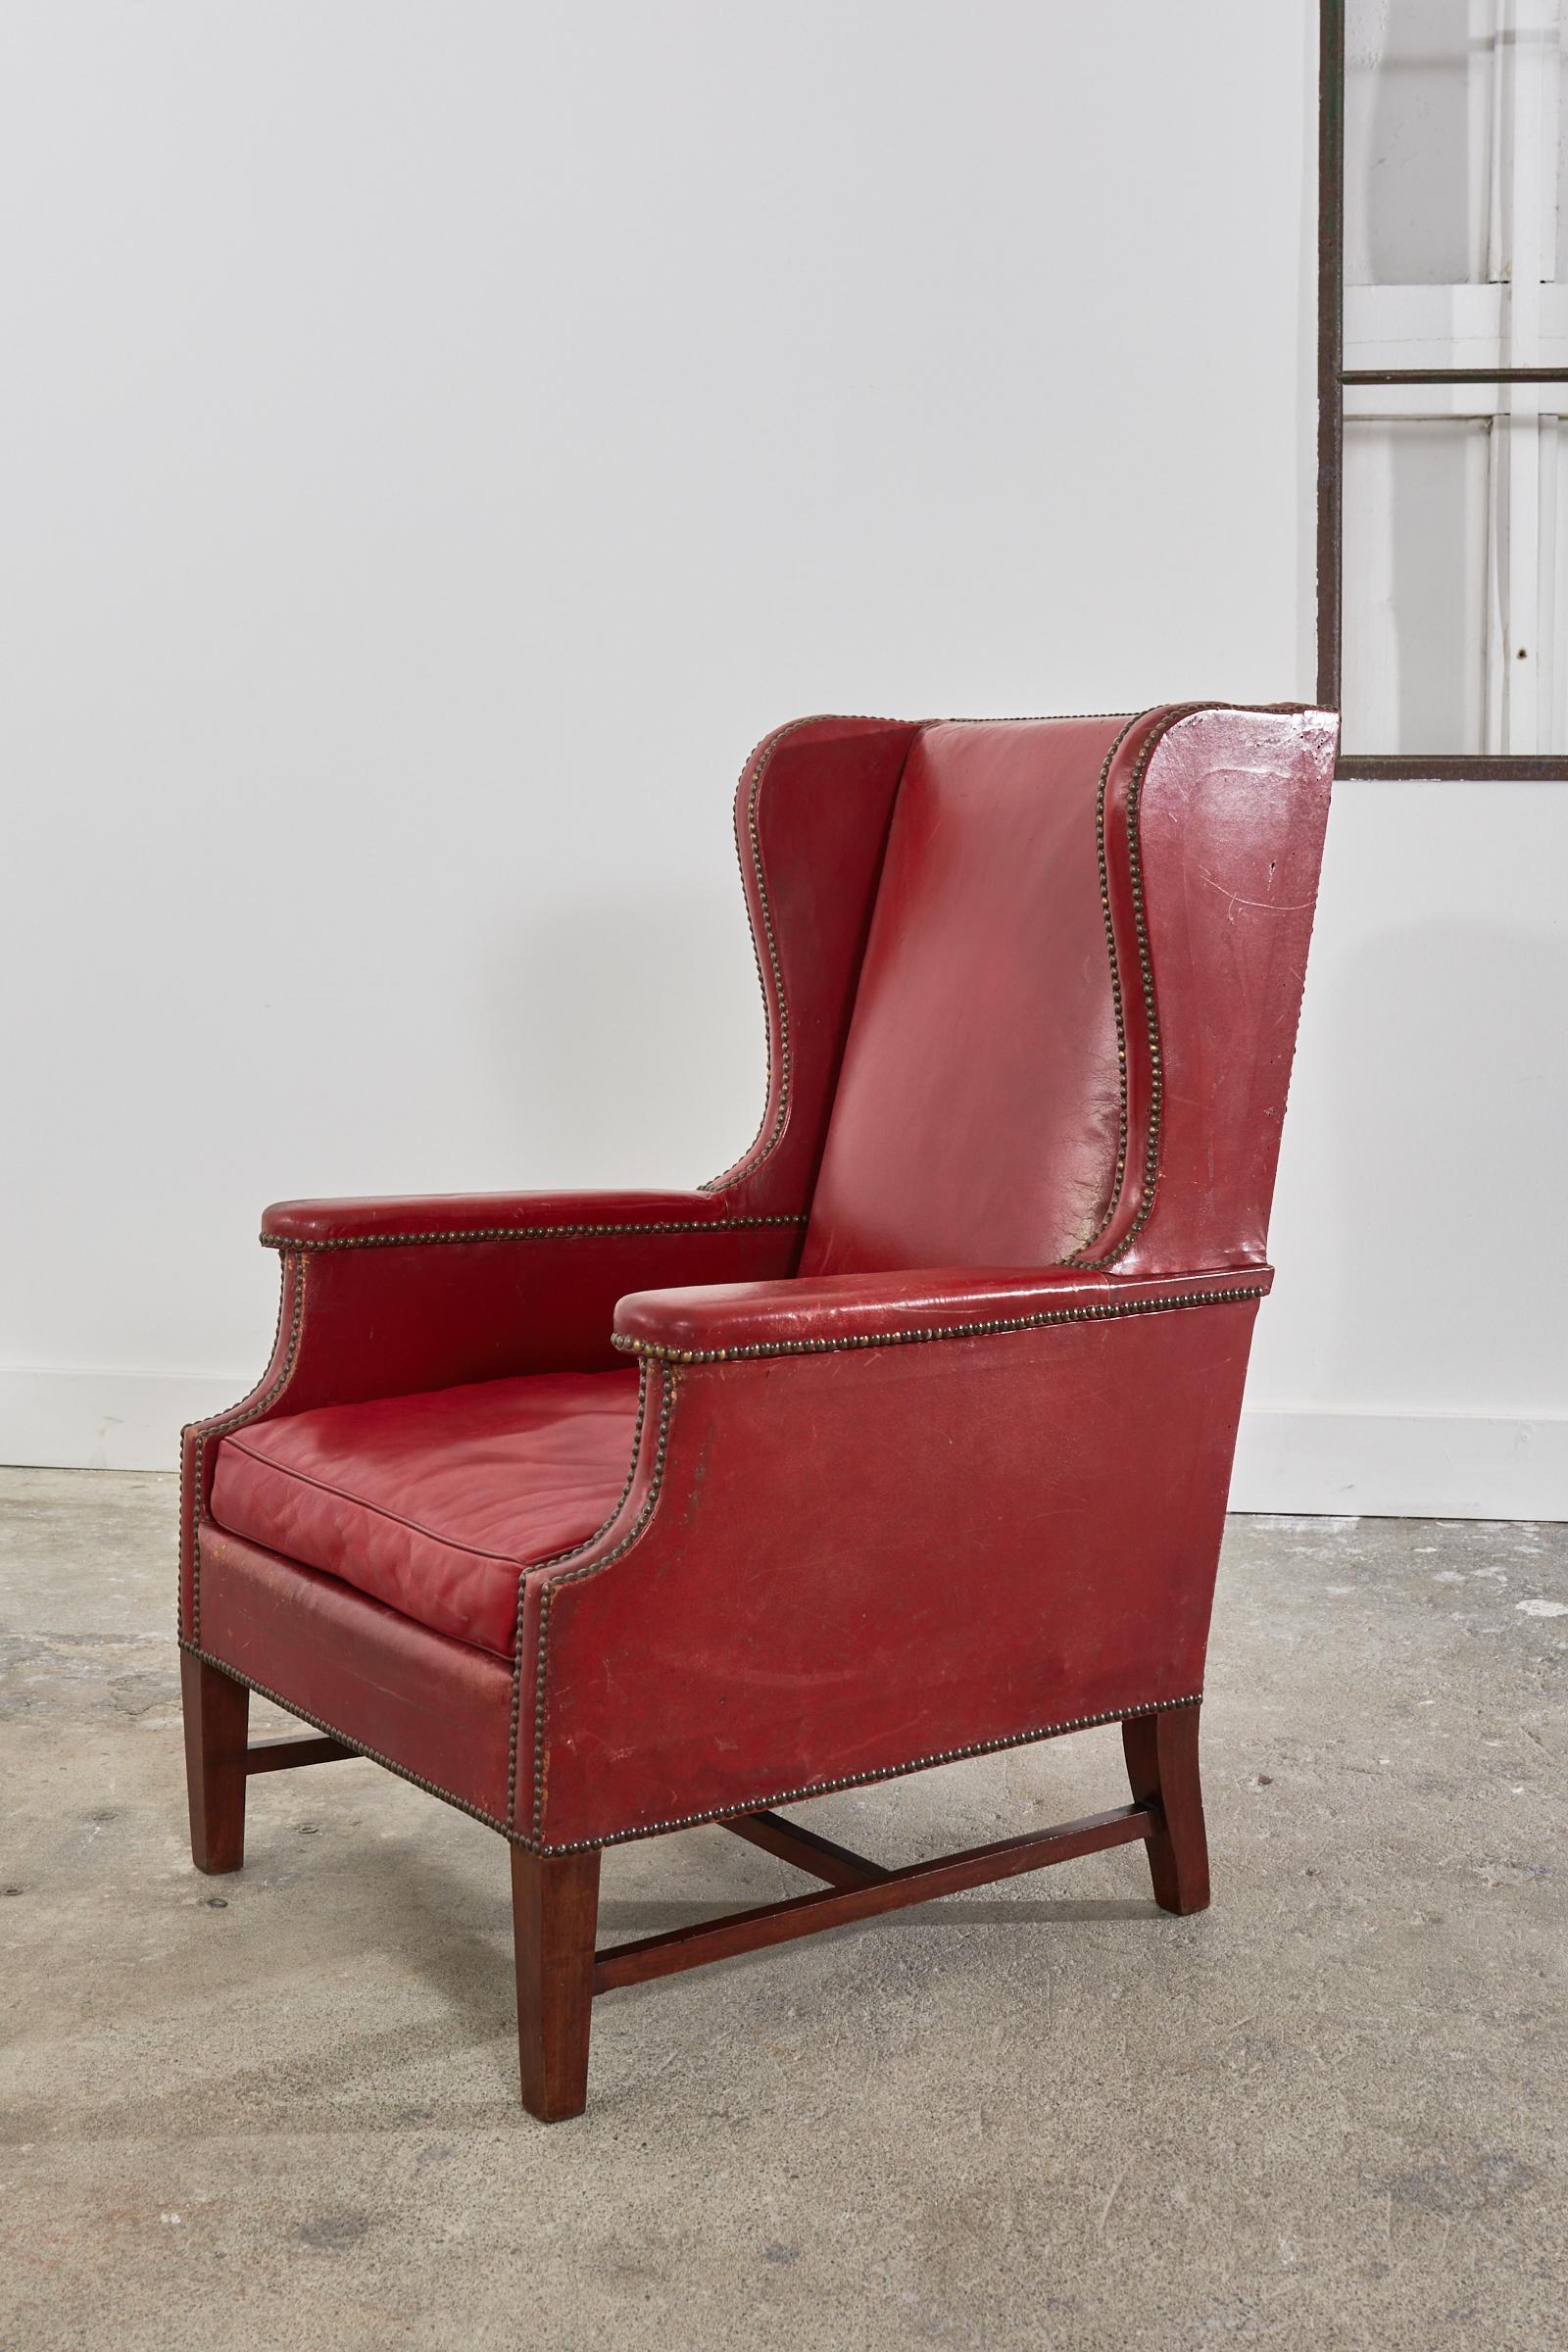 Pair of French Art Deco Cherry Red Leather Wingback Chairs For Sale 10